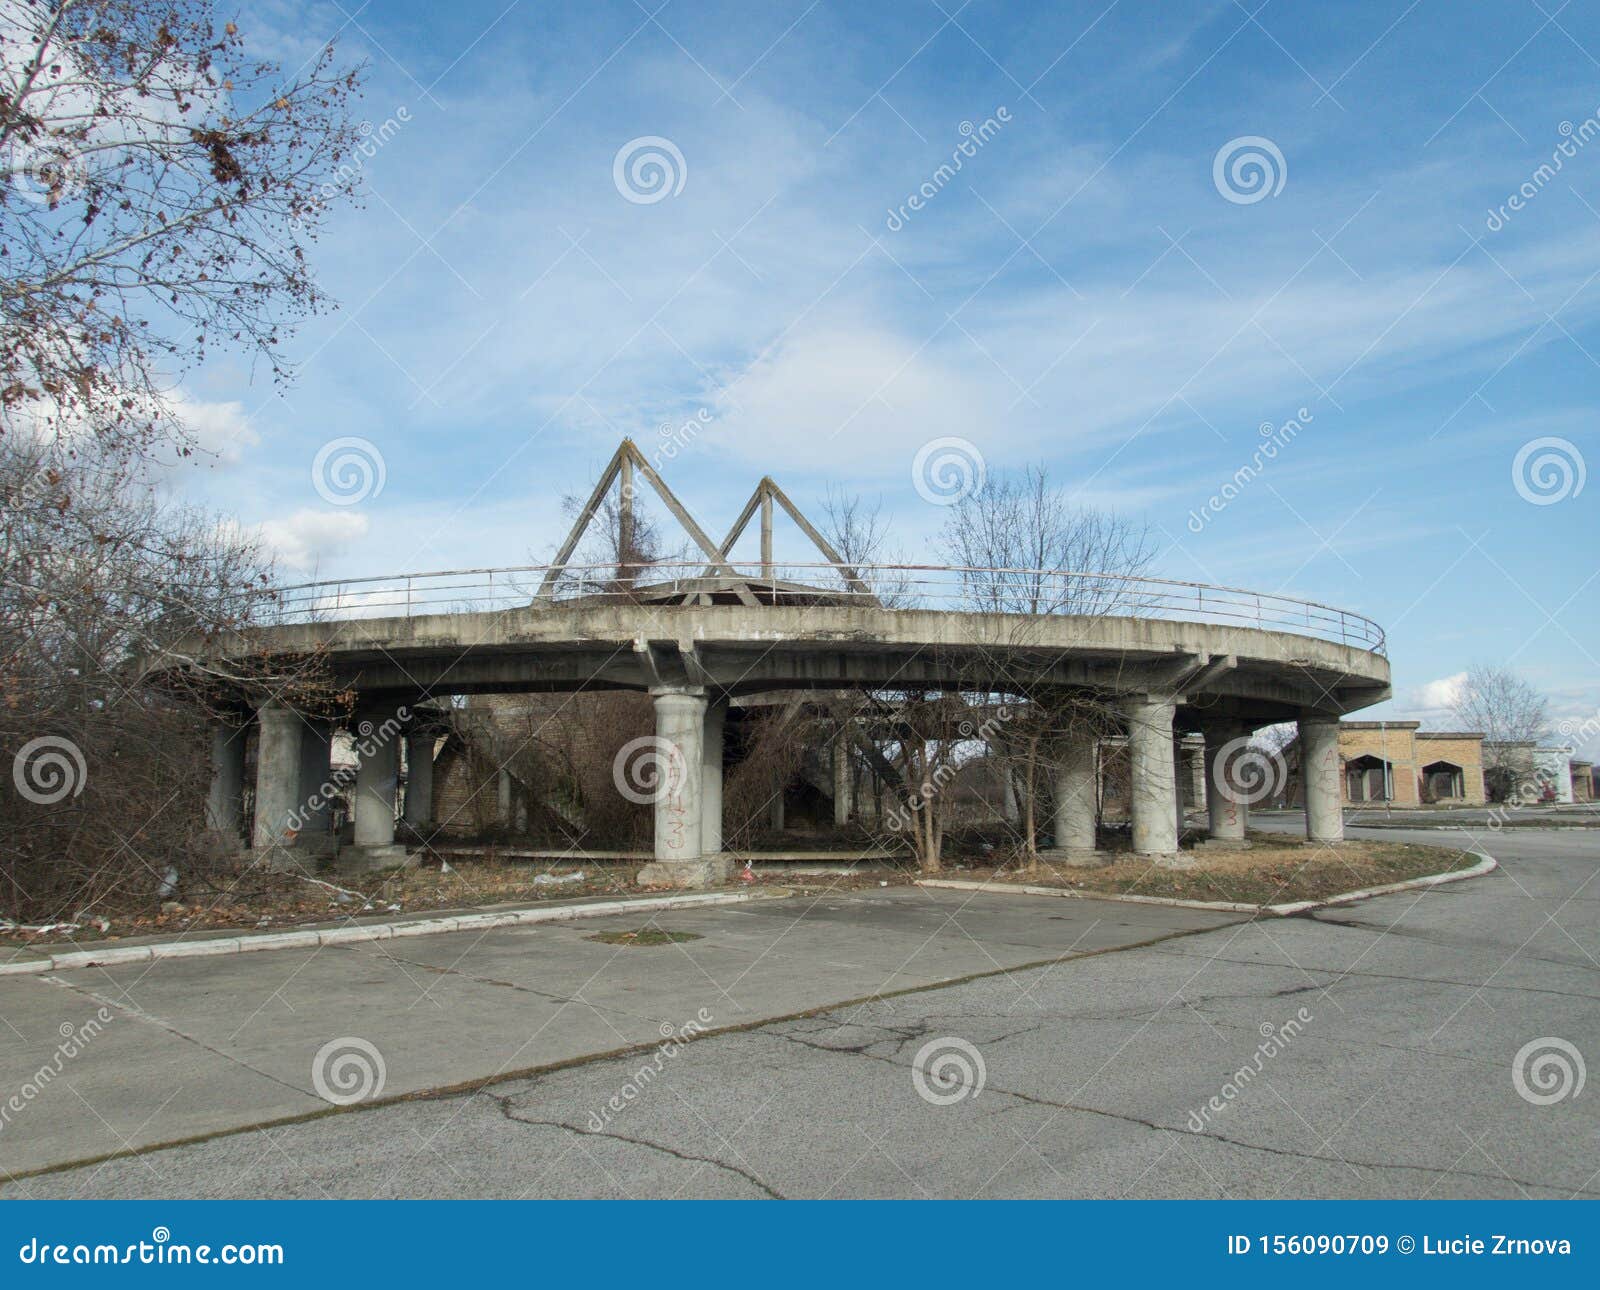 abandoned; architectural; architecture; balcan; balkan; building; city; concrete; danger; depressive; downtown; expressway; fright